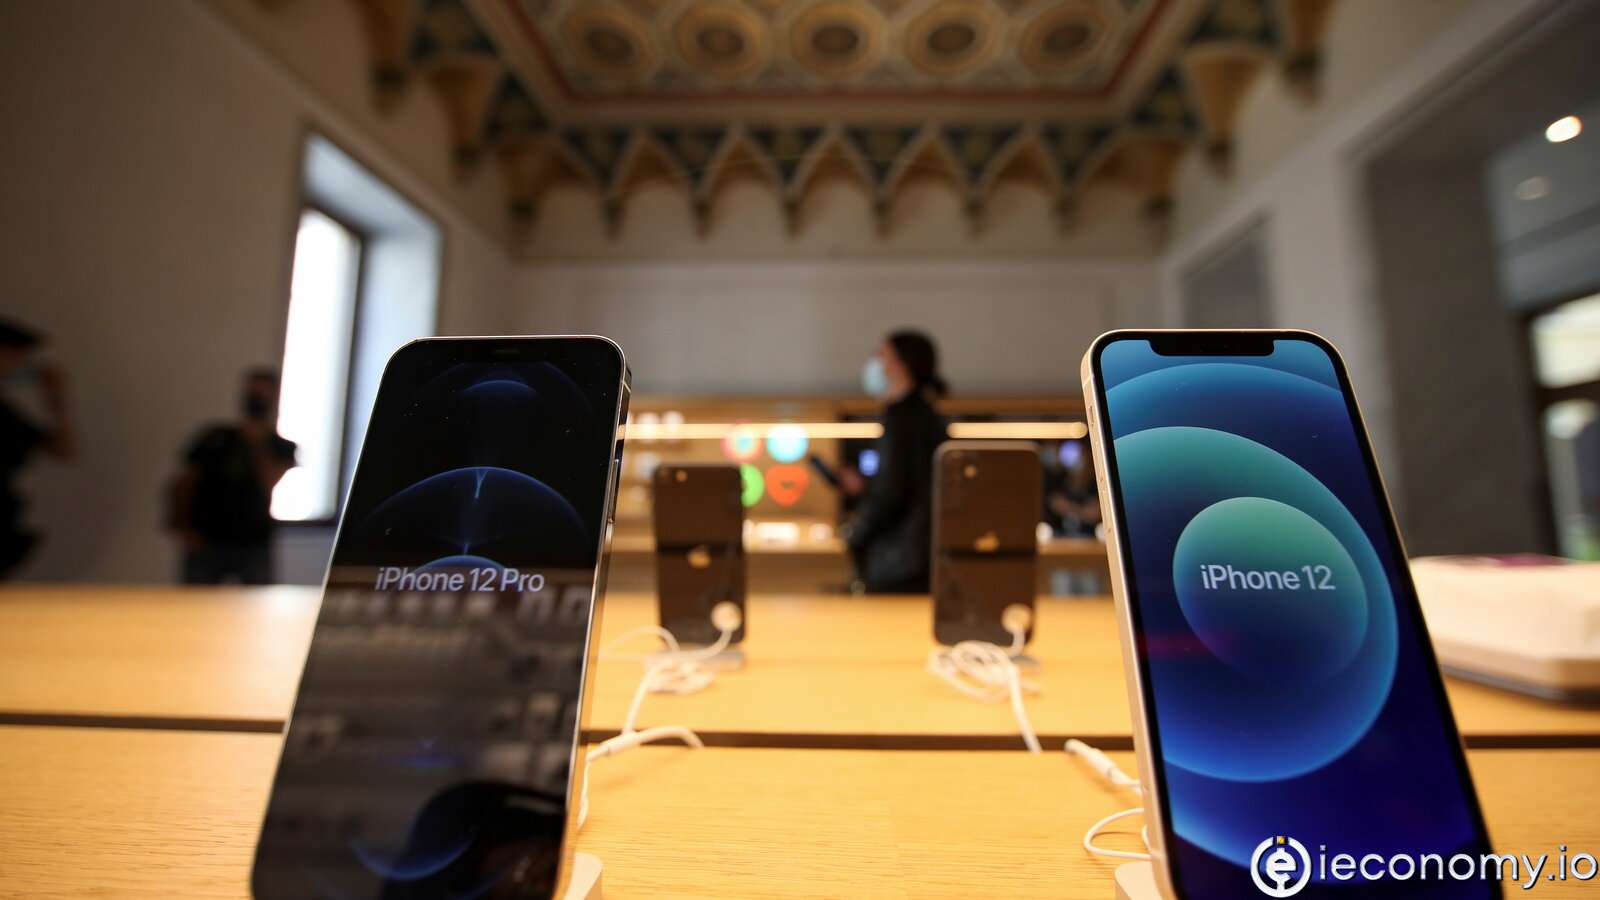 Apple's profit almost doubled, supported by the sale of iPhones